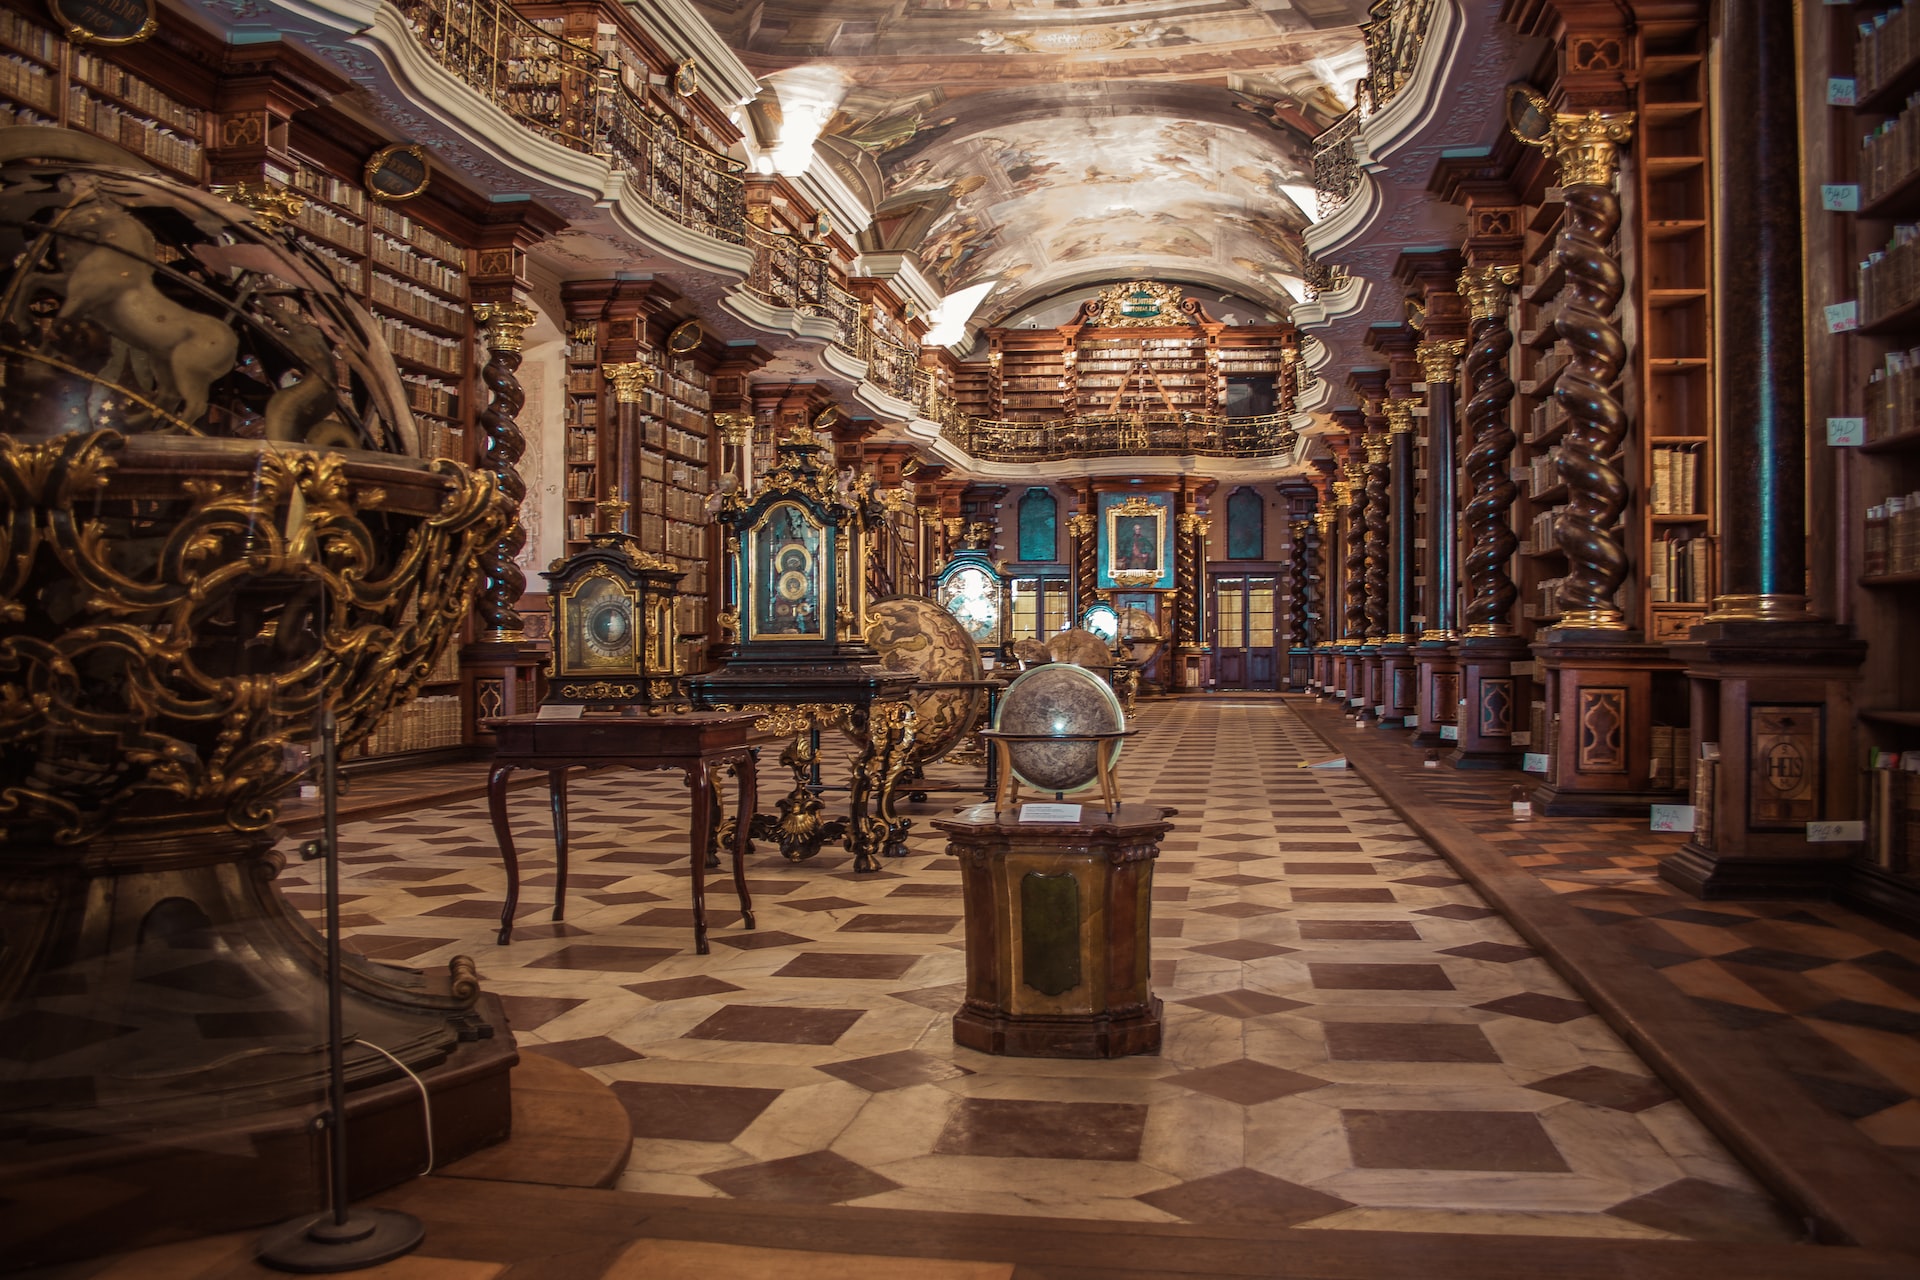 A library filled with several elements related to astrology